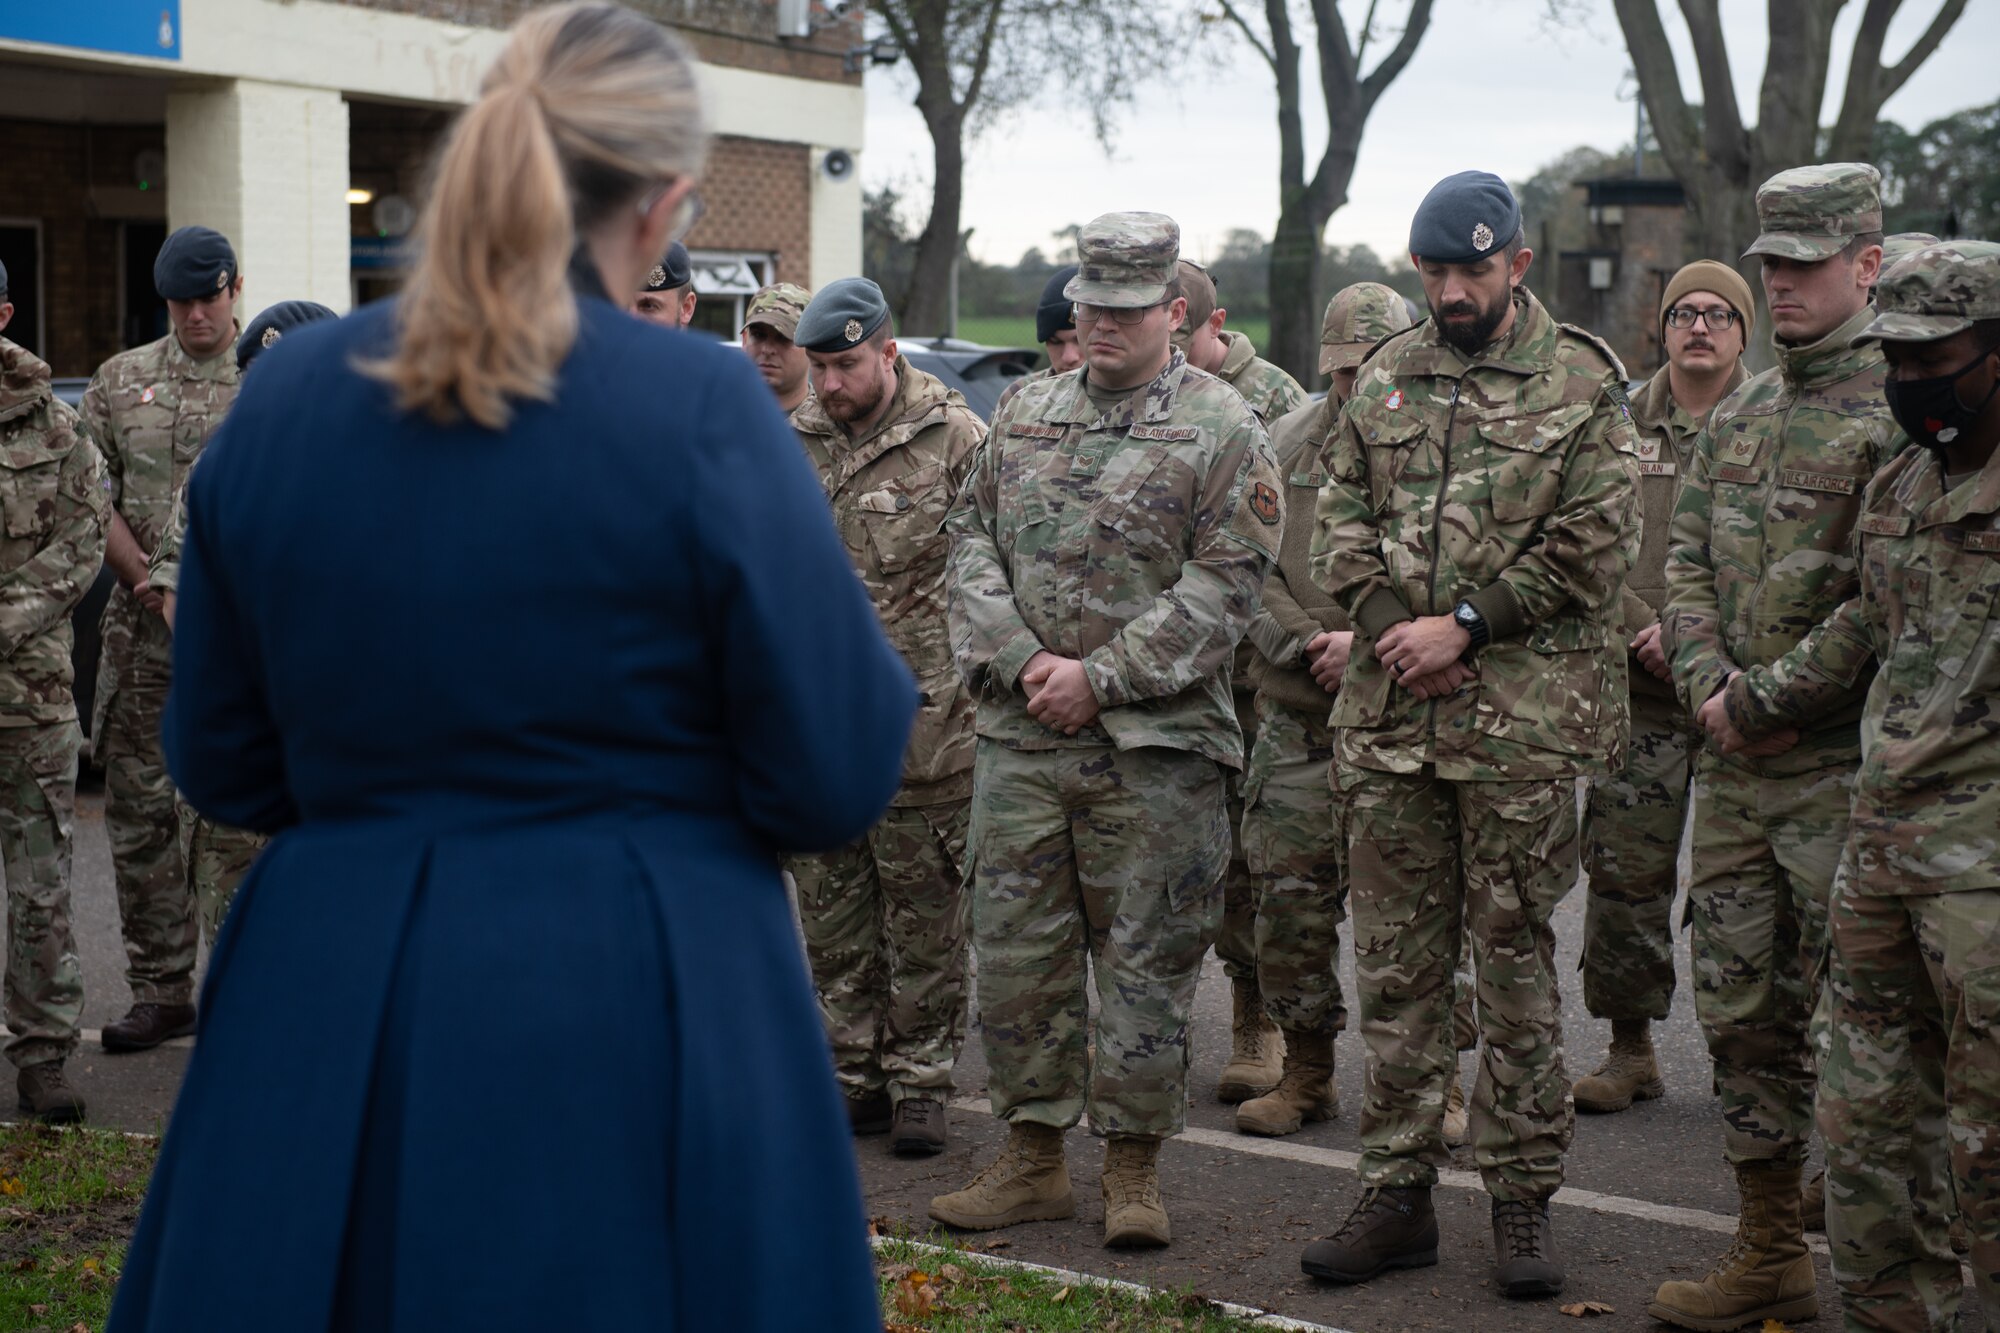 U.S. and Royal Air Force personnel participate in a memorial service Nov. 10, 2022, at RAF Honington, England. RAF Honington hosted U.S. Air Force noncommissioned officers for a leadership exchange program, strengthening ties between partner nations. (U.S. Air Force photo by Staff Sgt. Charles Welty)